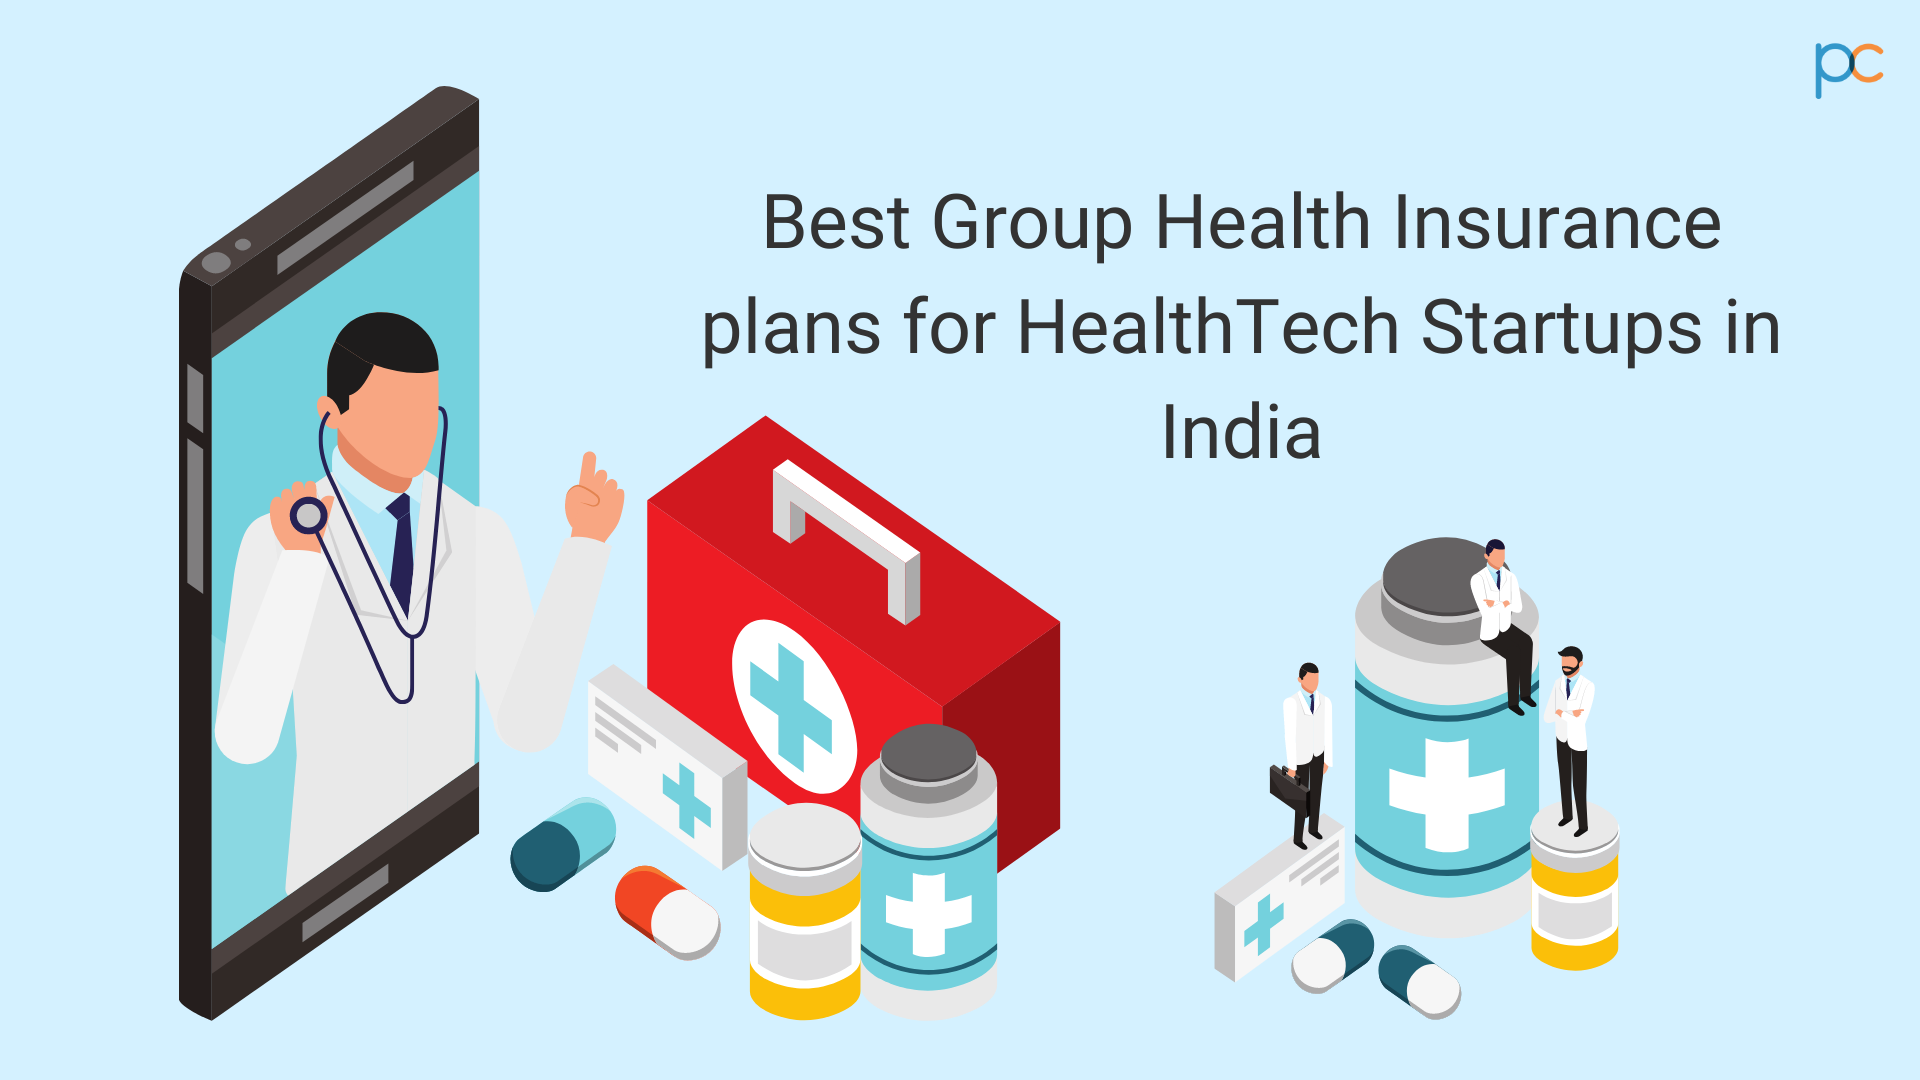 Best Group Health Insurance plans for health tech startups in India